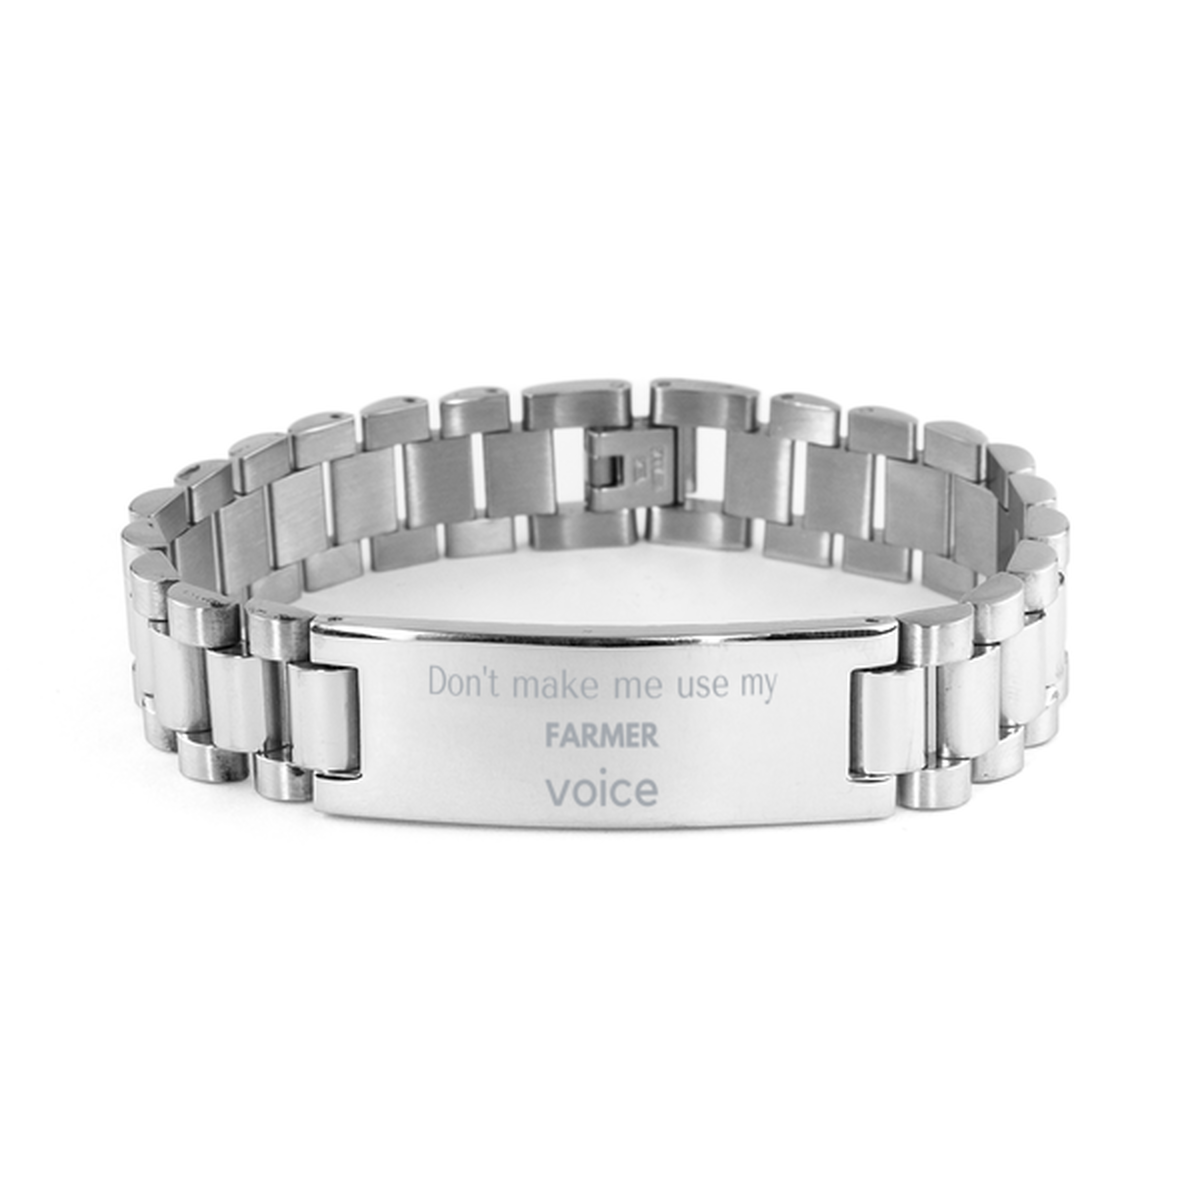 Don't make me use my Farmer voice, Sarcasm Farmer Gifts, Christmas Farmer Ladder Stainless Steel Bracelet Birthday Unique Gifts For Farmer Coworkers, Men, Women, Colleague, Friends